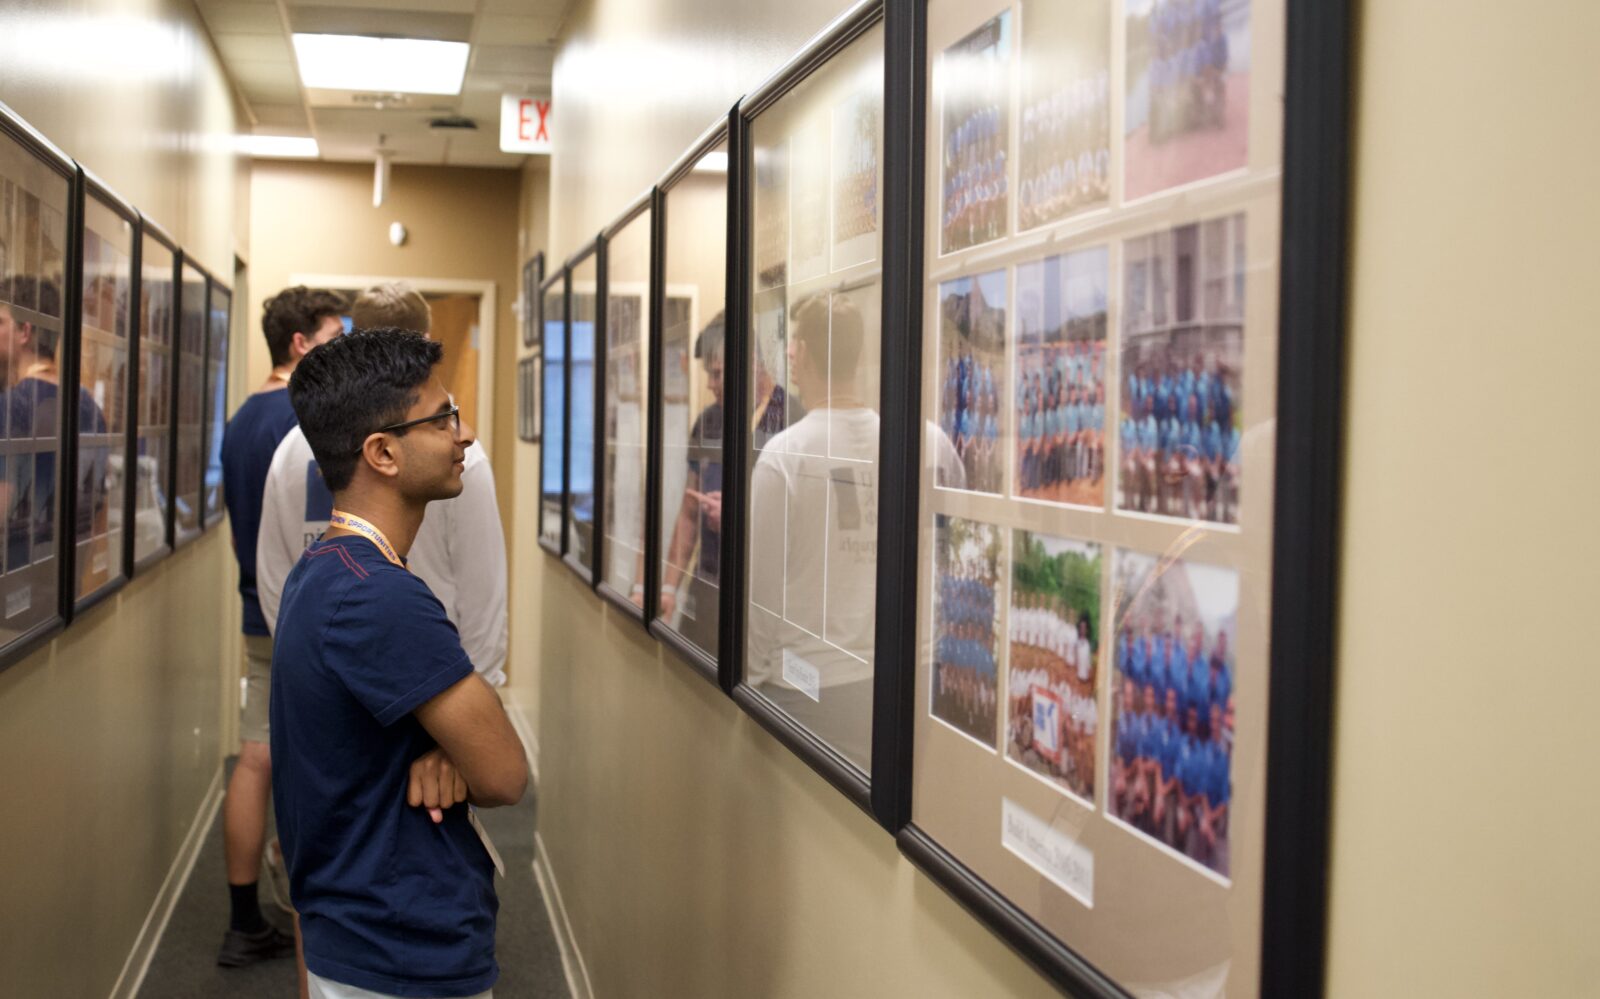 Pi Kappa Phi member in a hallway, looking at group photos from previous years.